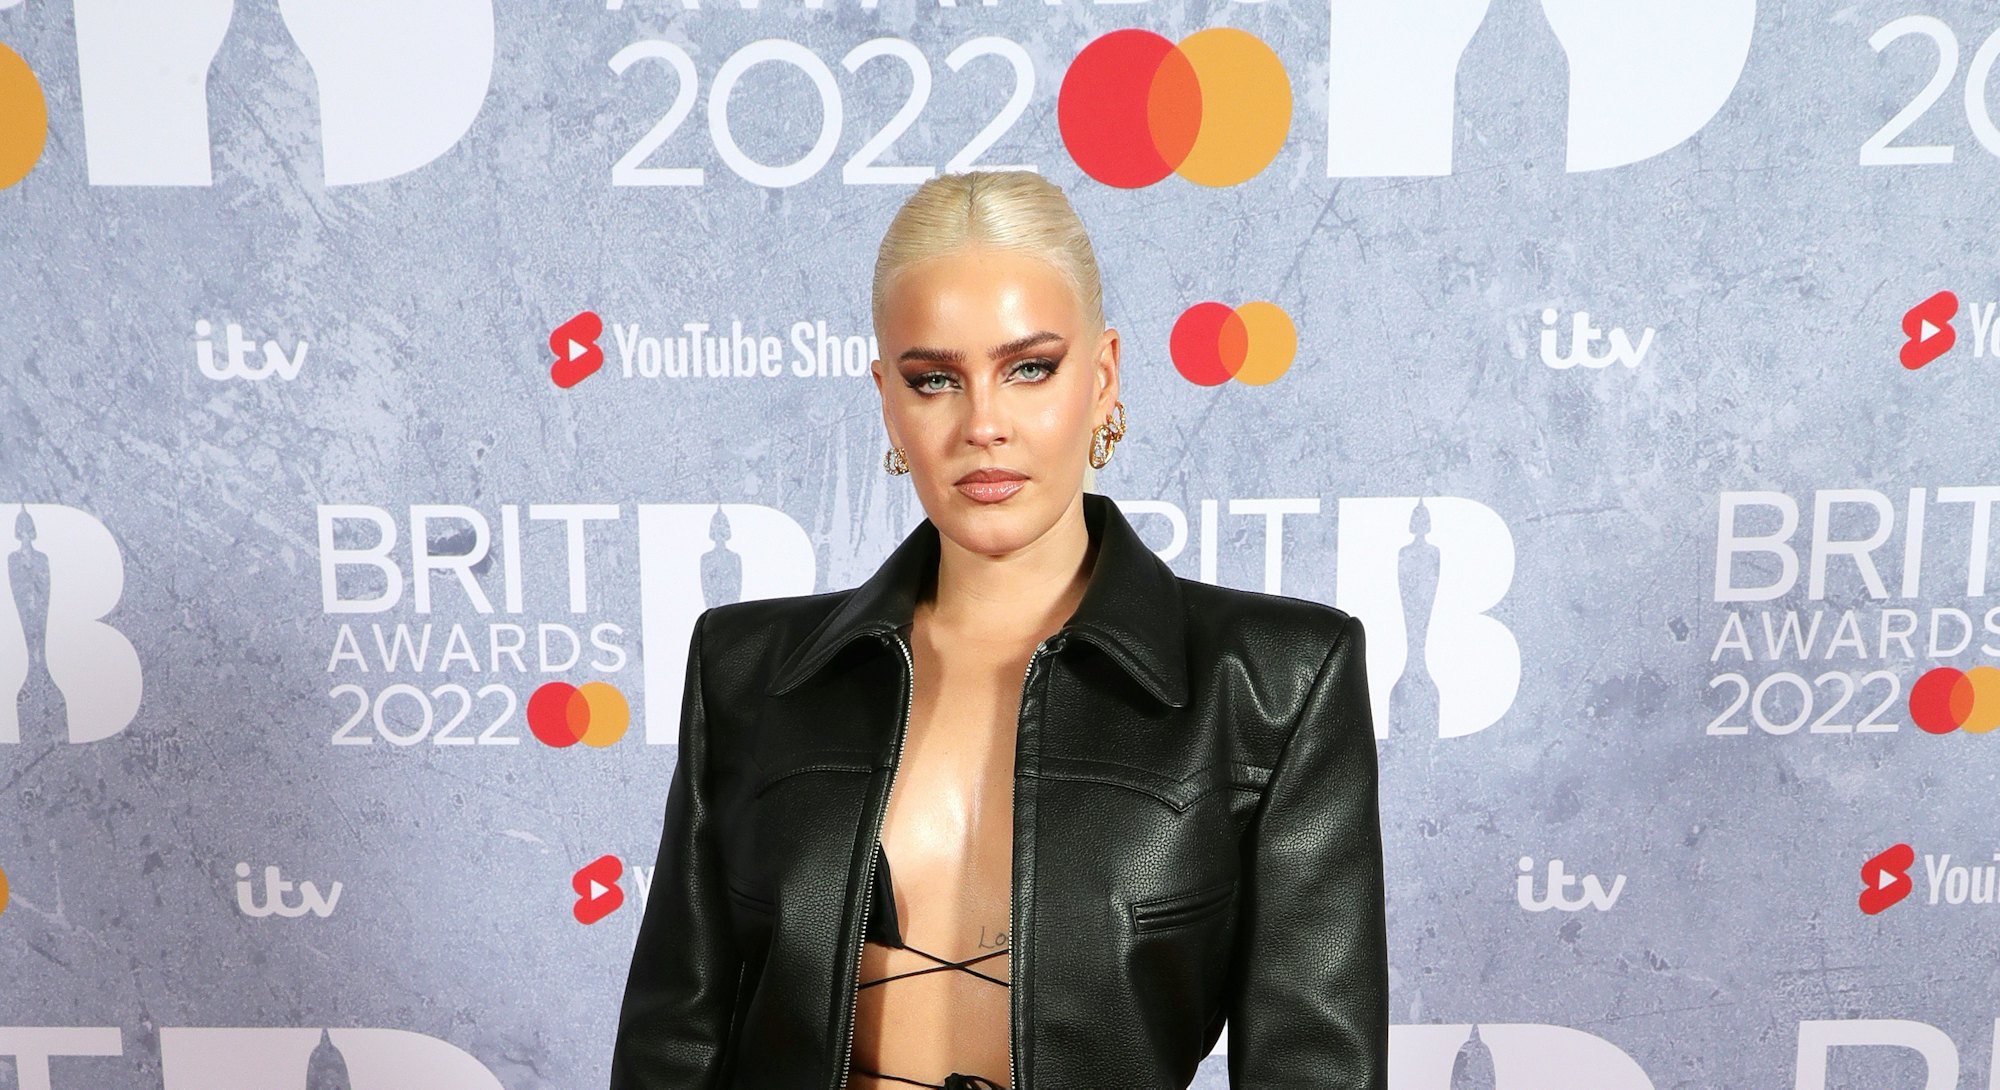 Anne-Marie in a leather jacket and lace up top at the Brit Awards in London.